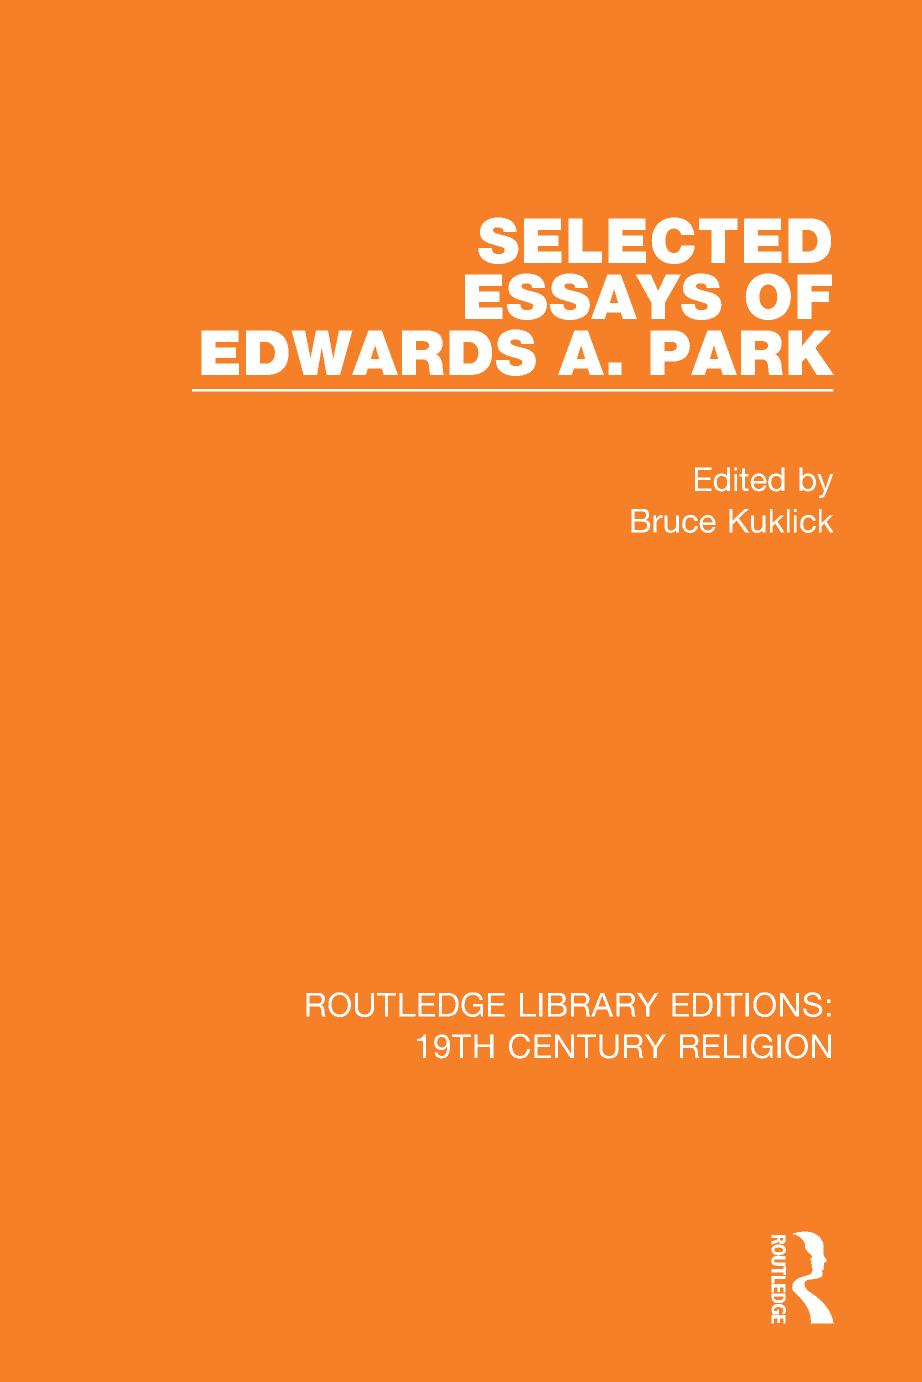 Selected Essays of Edwards A. Park by Bruce Kuklick